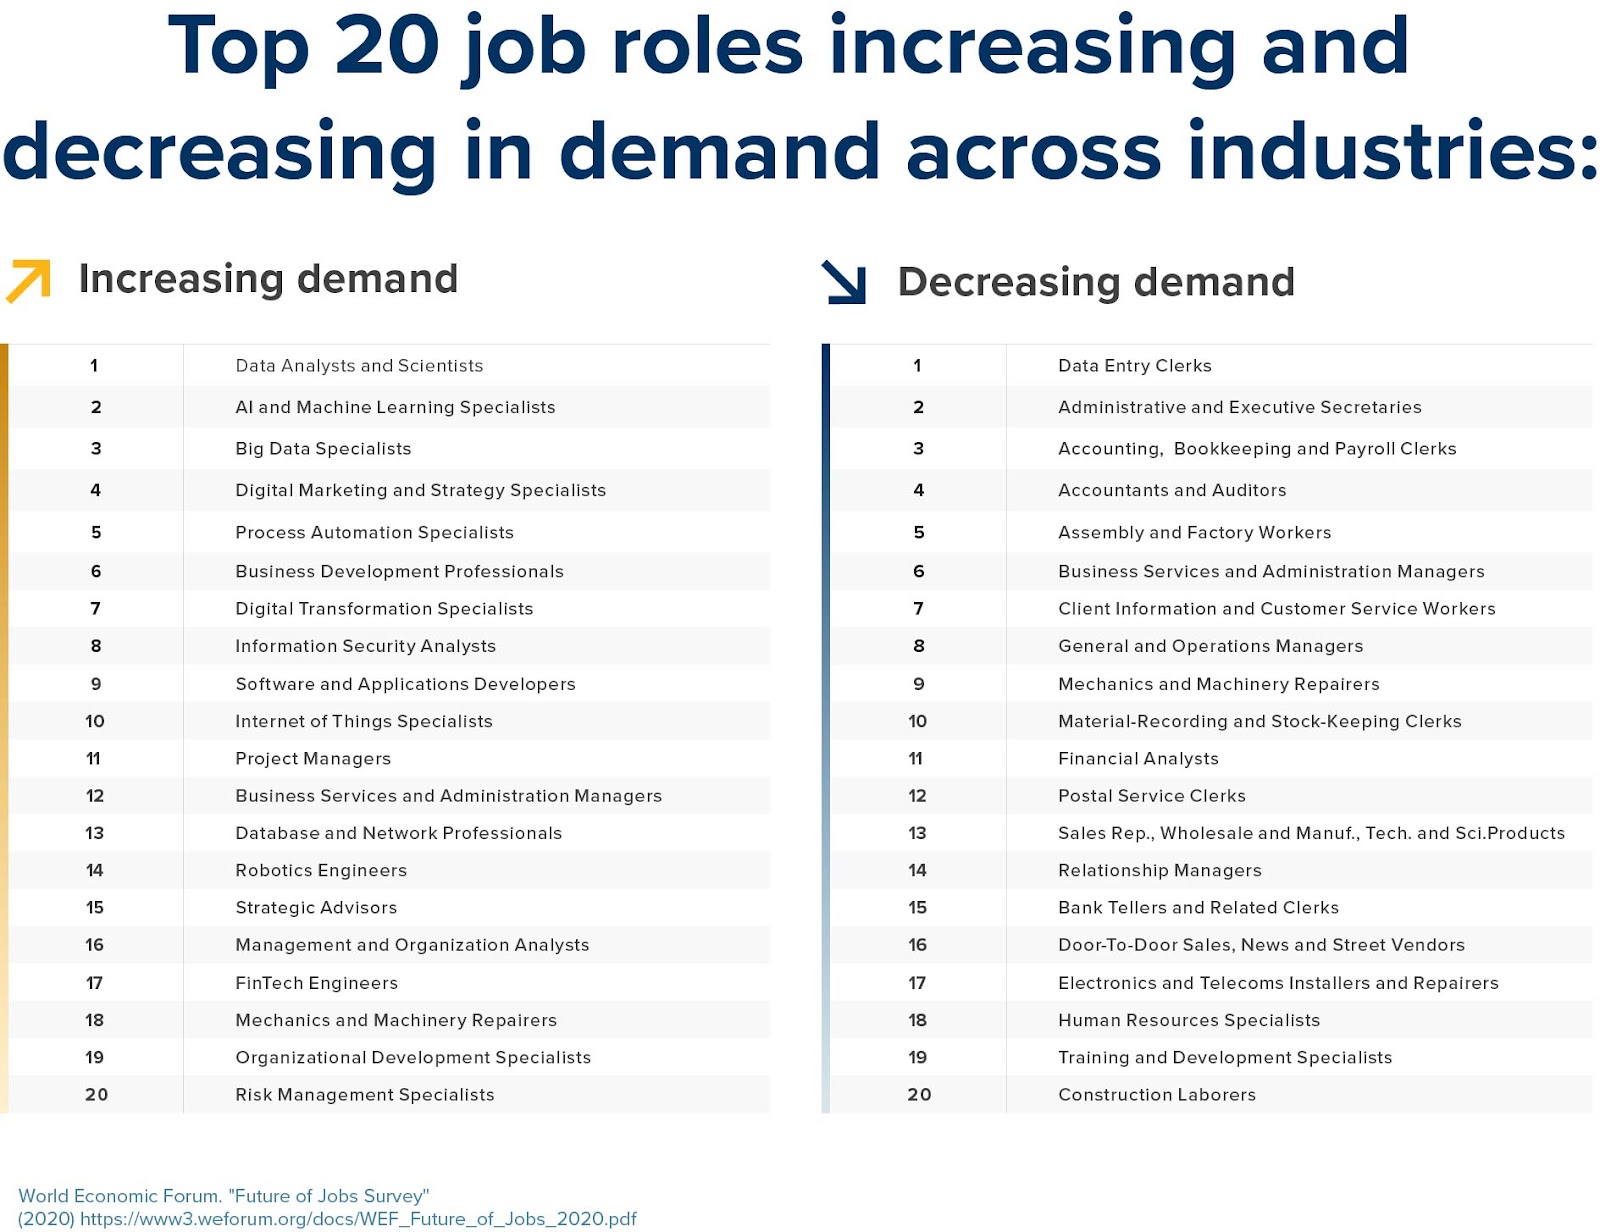 A chart that displays the top 20 job roles increasing and decreasing in demand across industries.